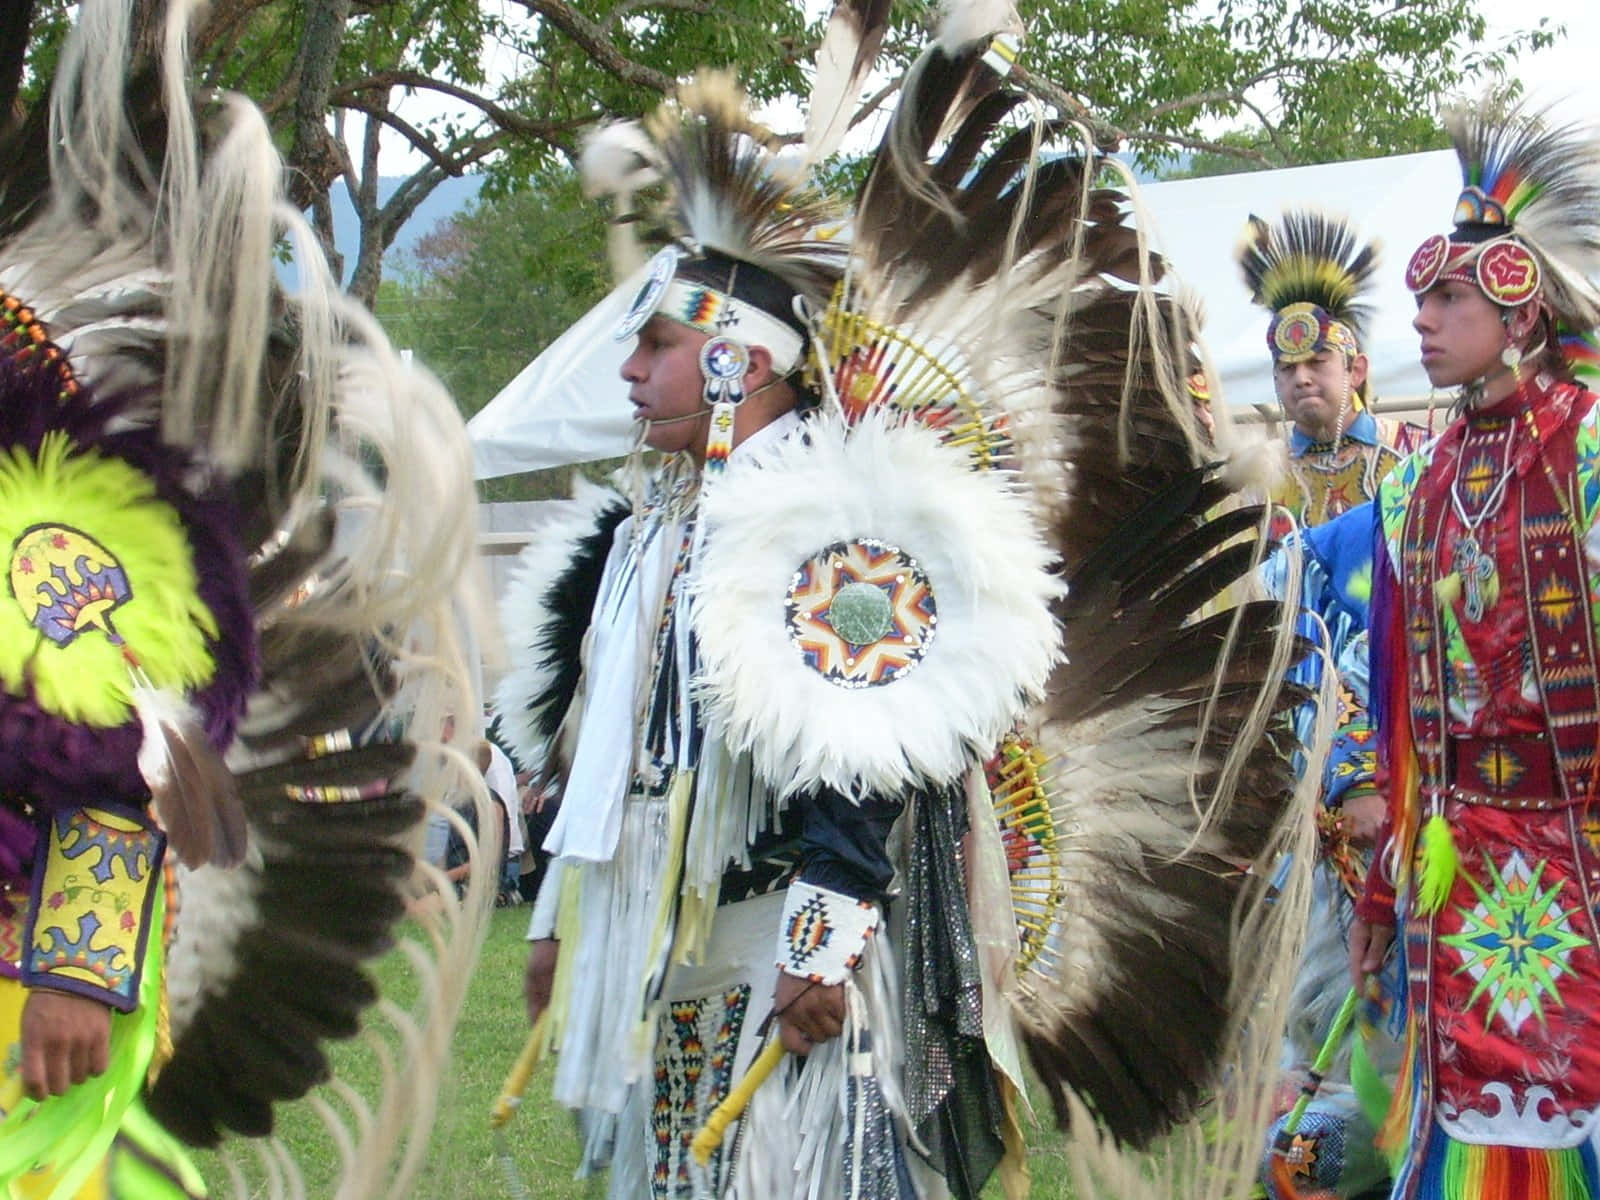 A Group Of Men In Colorful Feathers